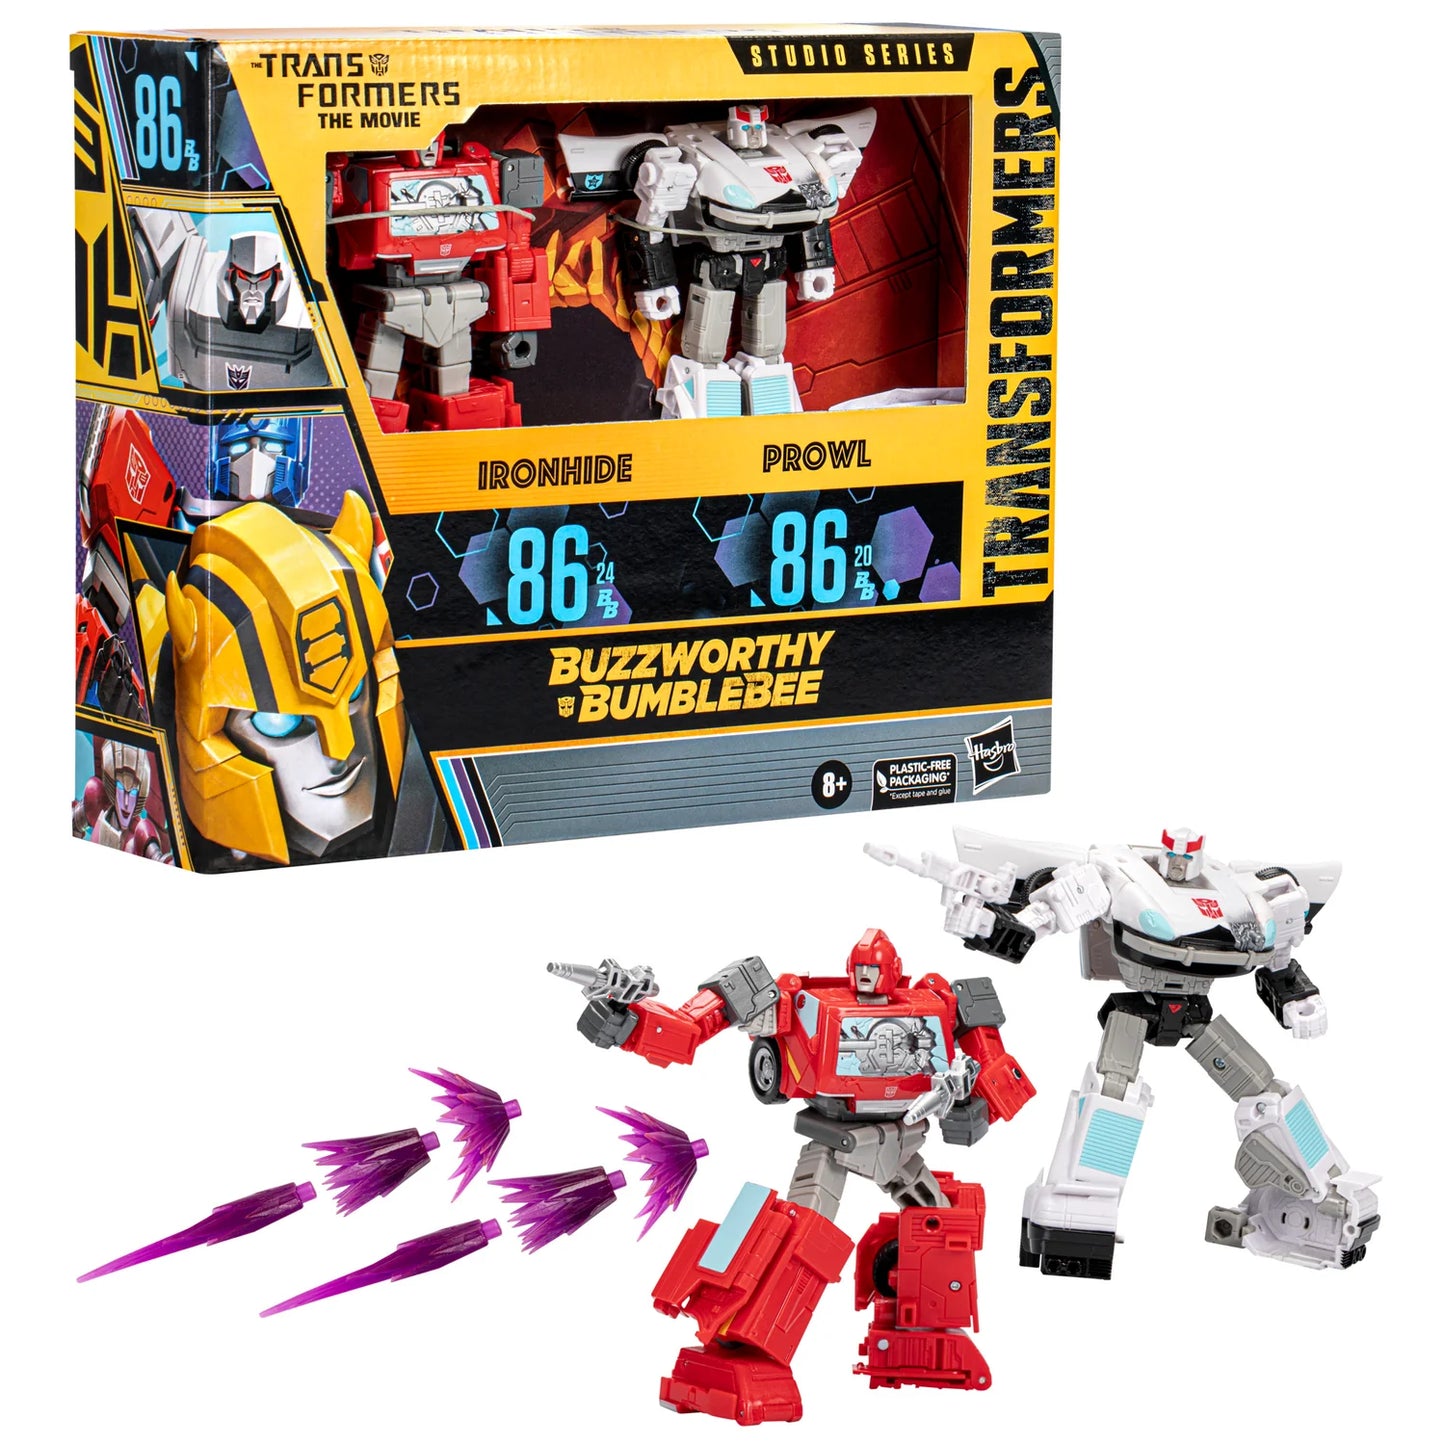 Transformers - Studio Series - Ironhide and Prowl (Target Exclusive)